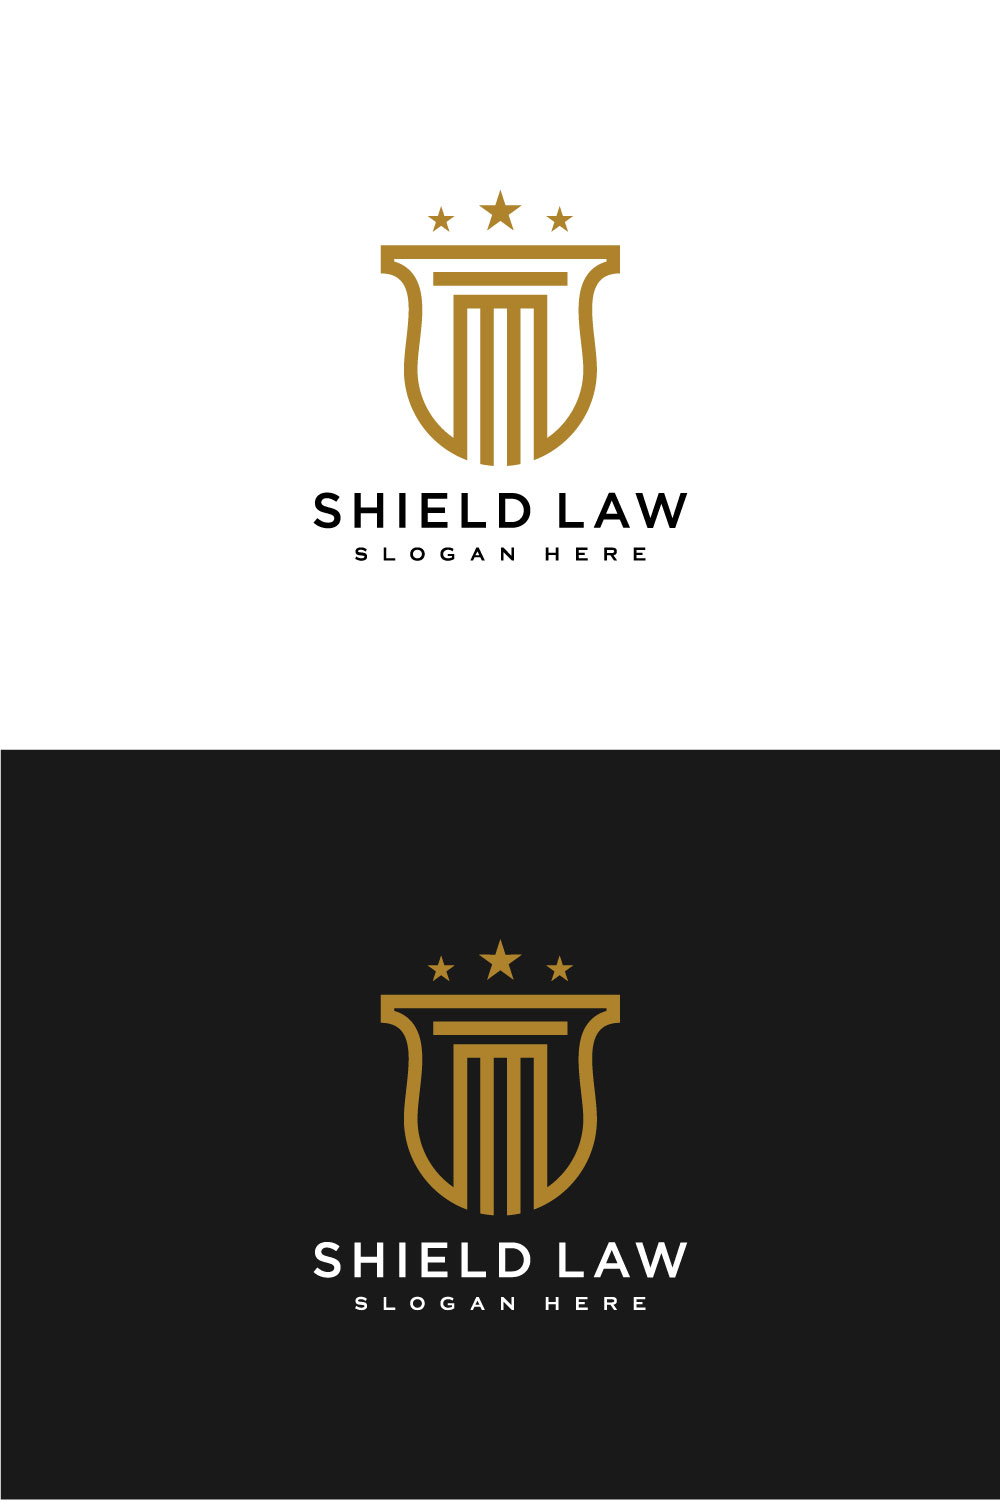 Law Firm and Shield Logo Design Vector pinterest.